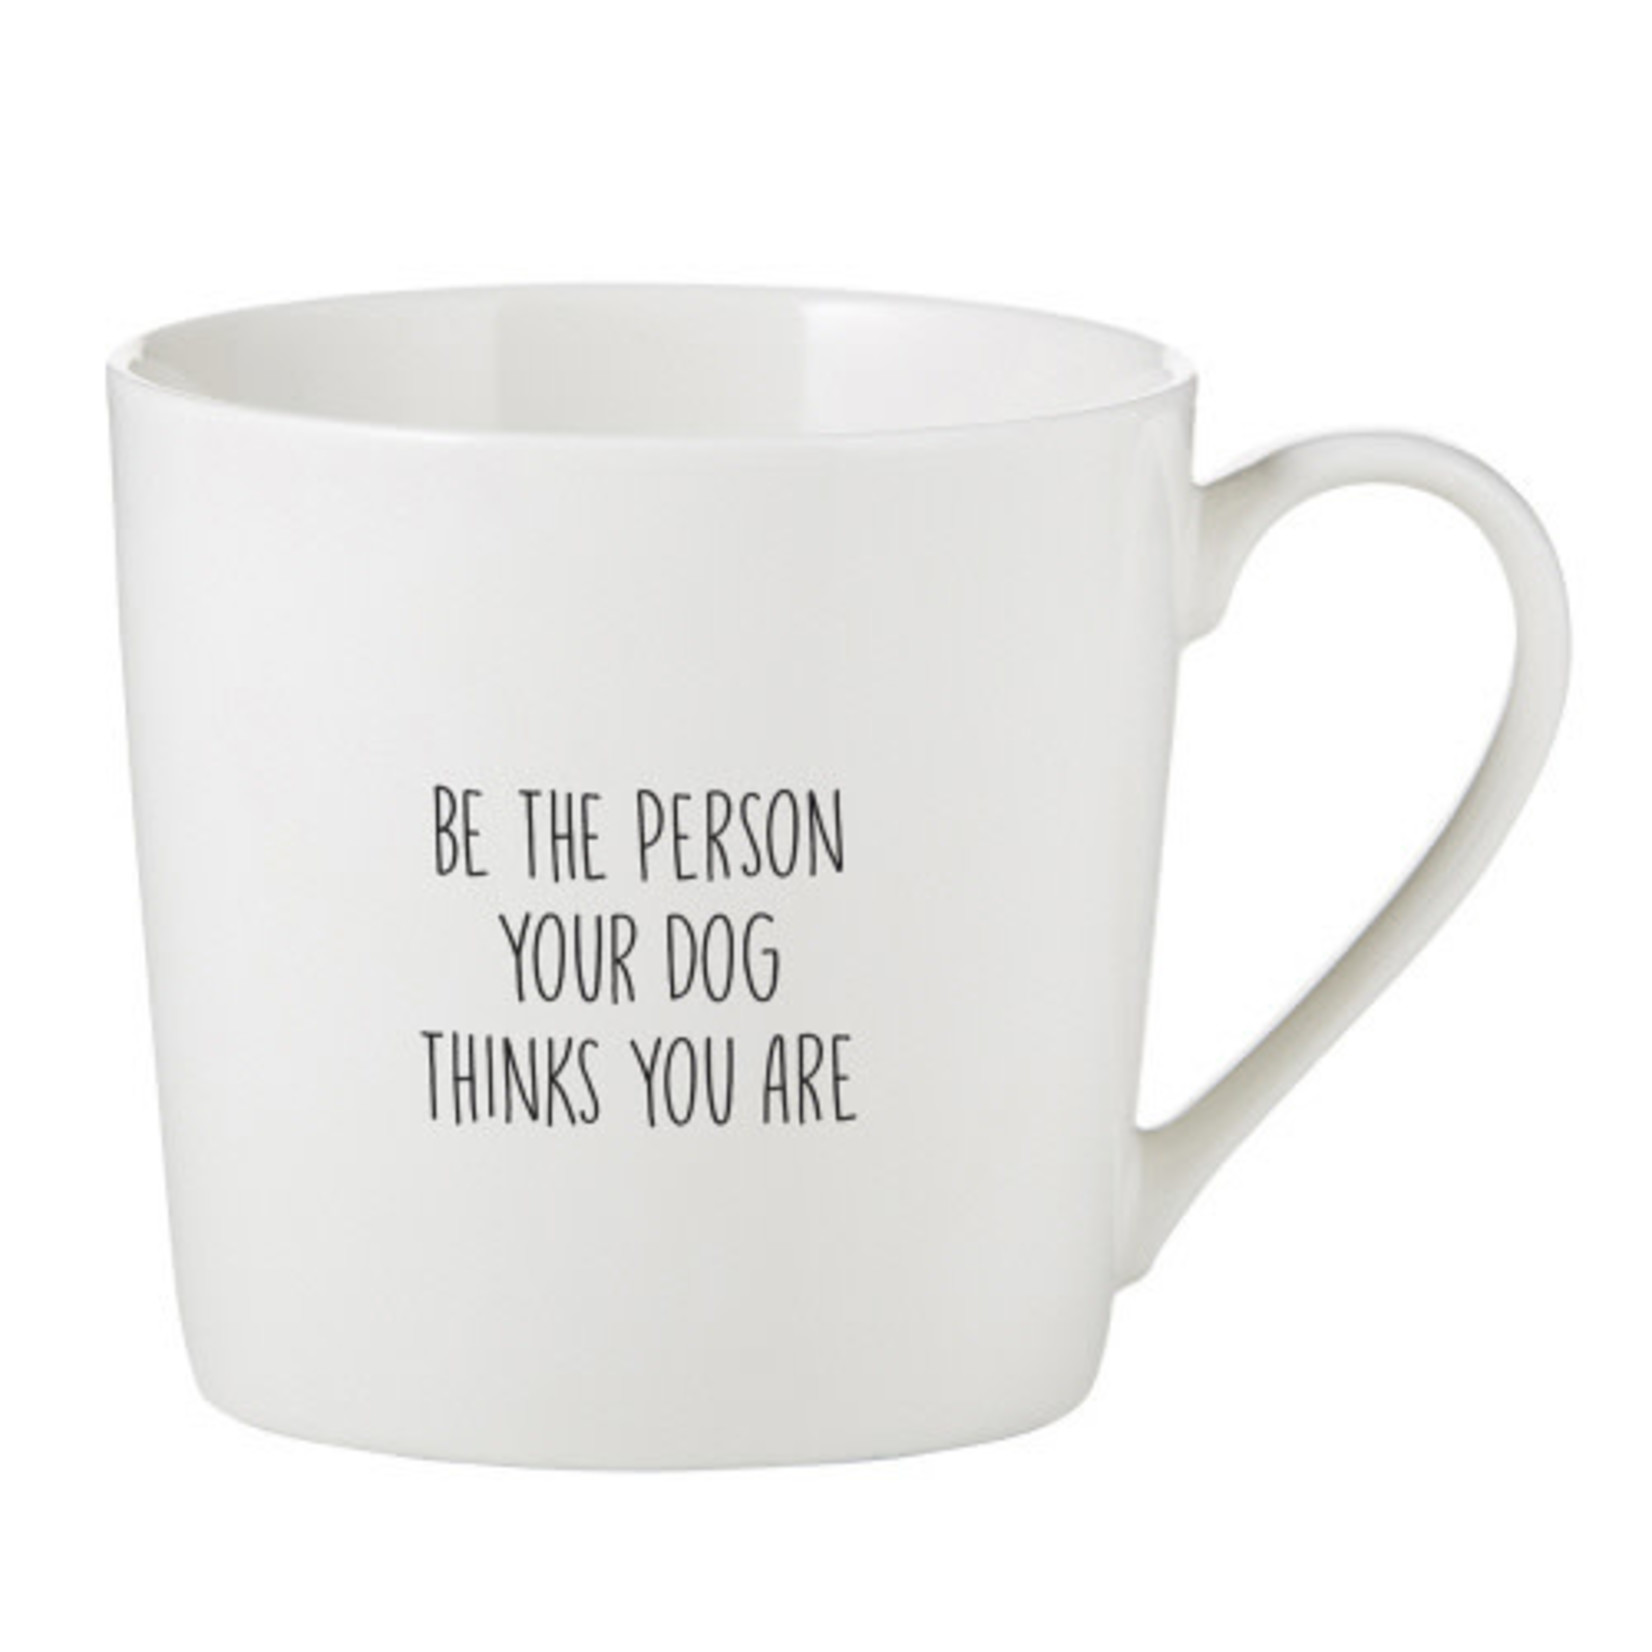 Creative Brands Be The Person Mug